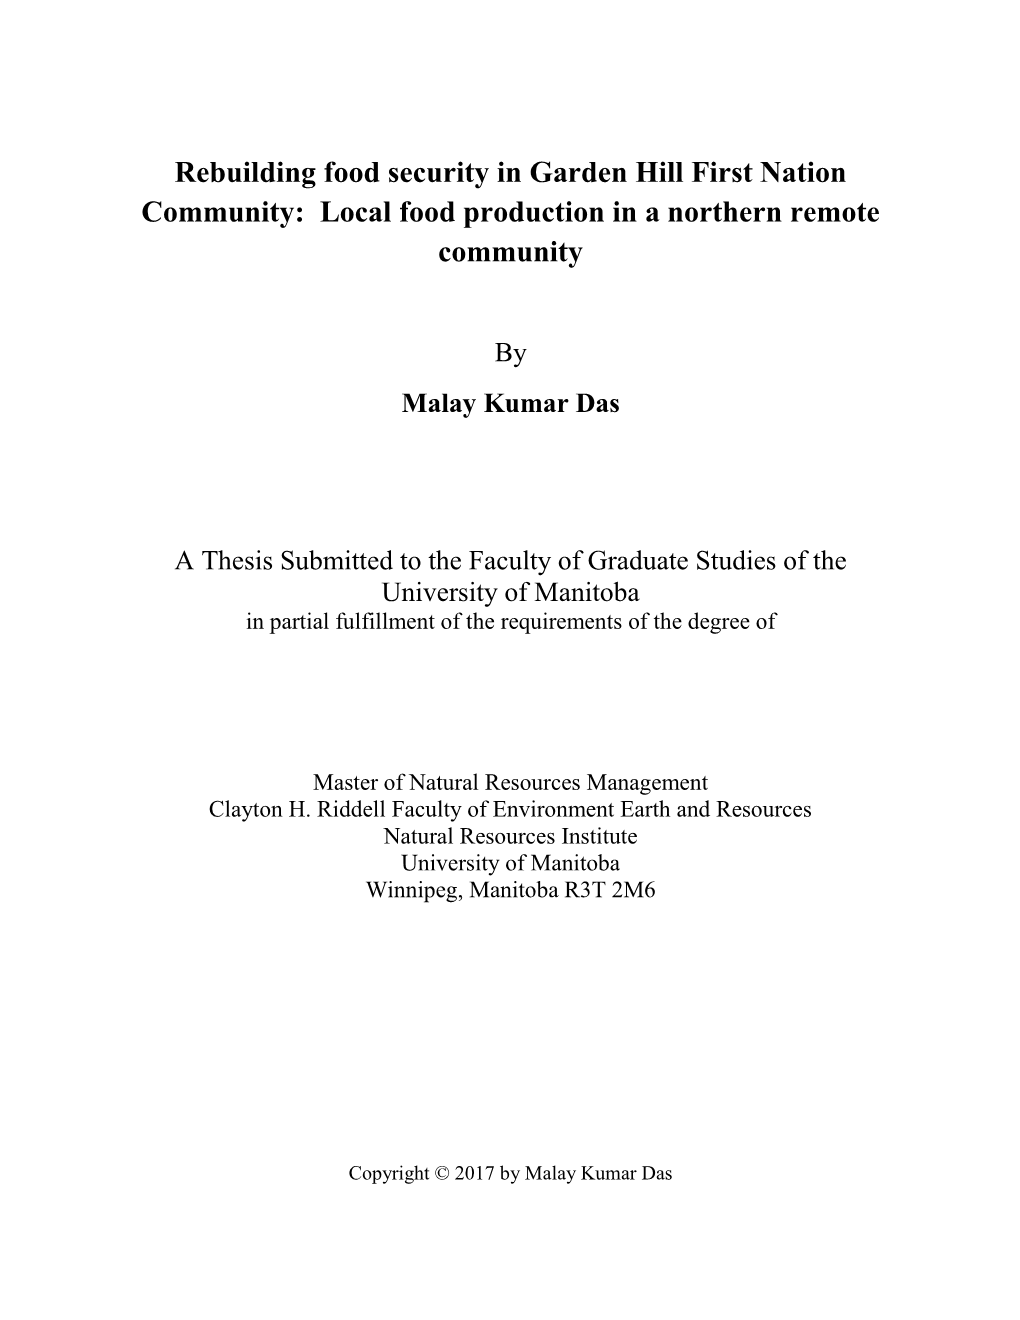 Rebuilding Food Security in Garden Hill First Nation Community: Local Food Production in a Northern Remote Community